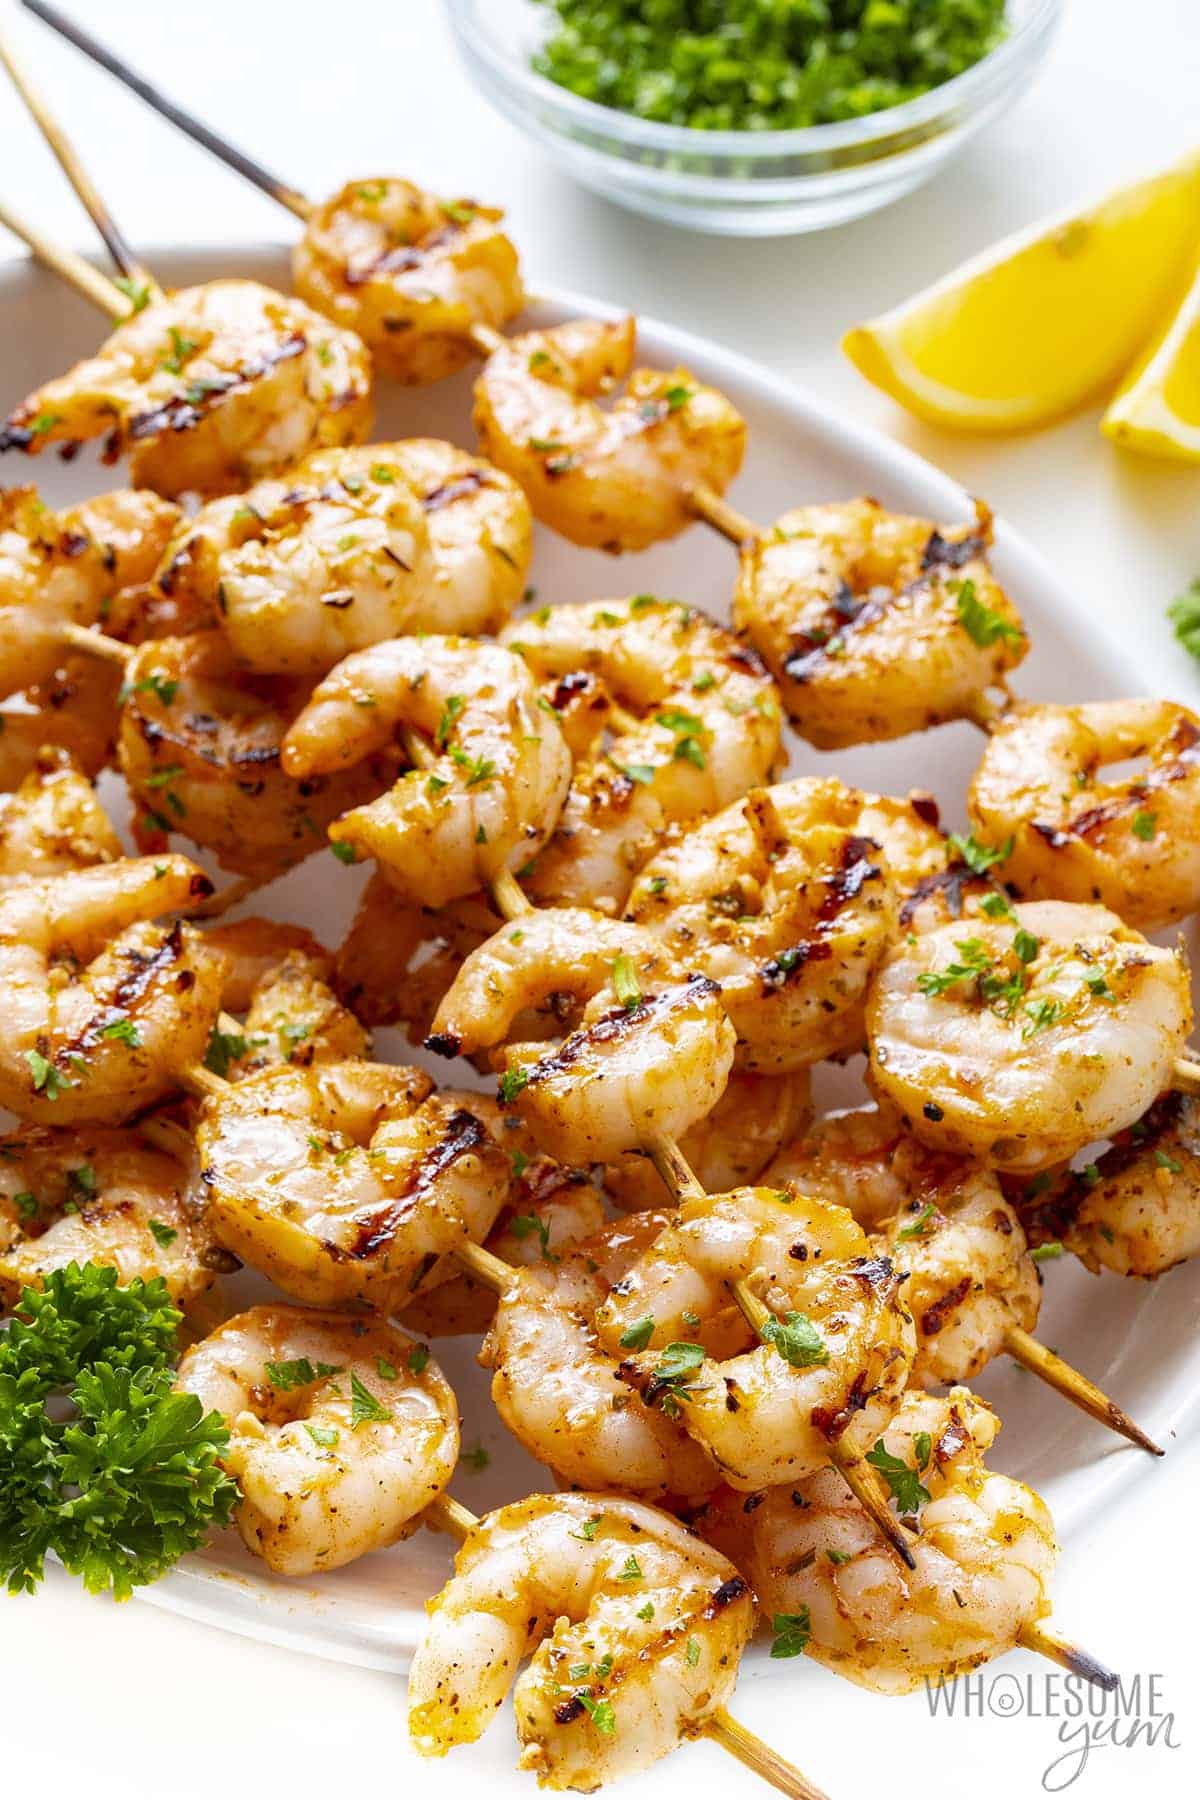 Cooked garlic shrimp skewers displayed on a plate with lemon wedges